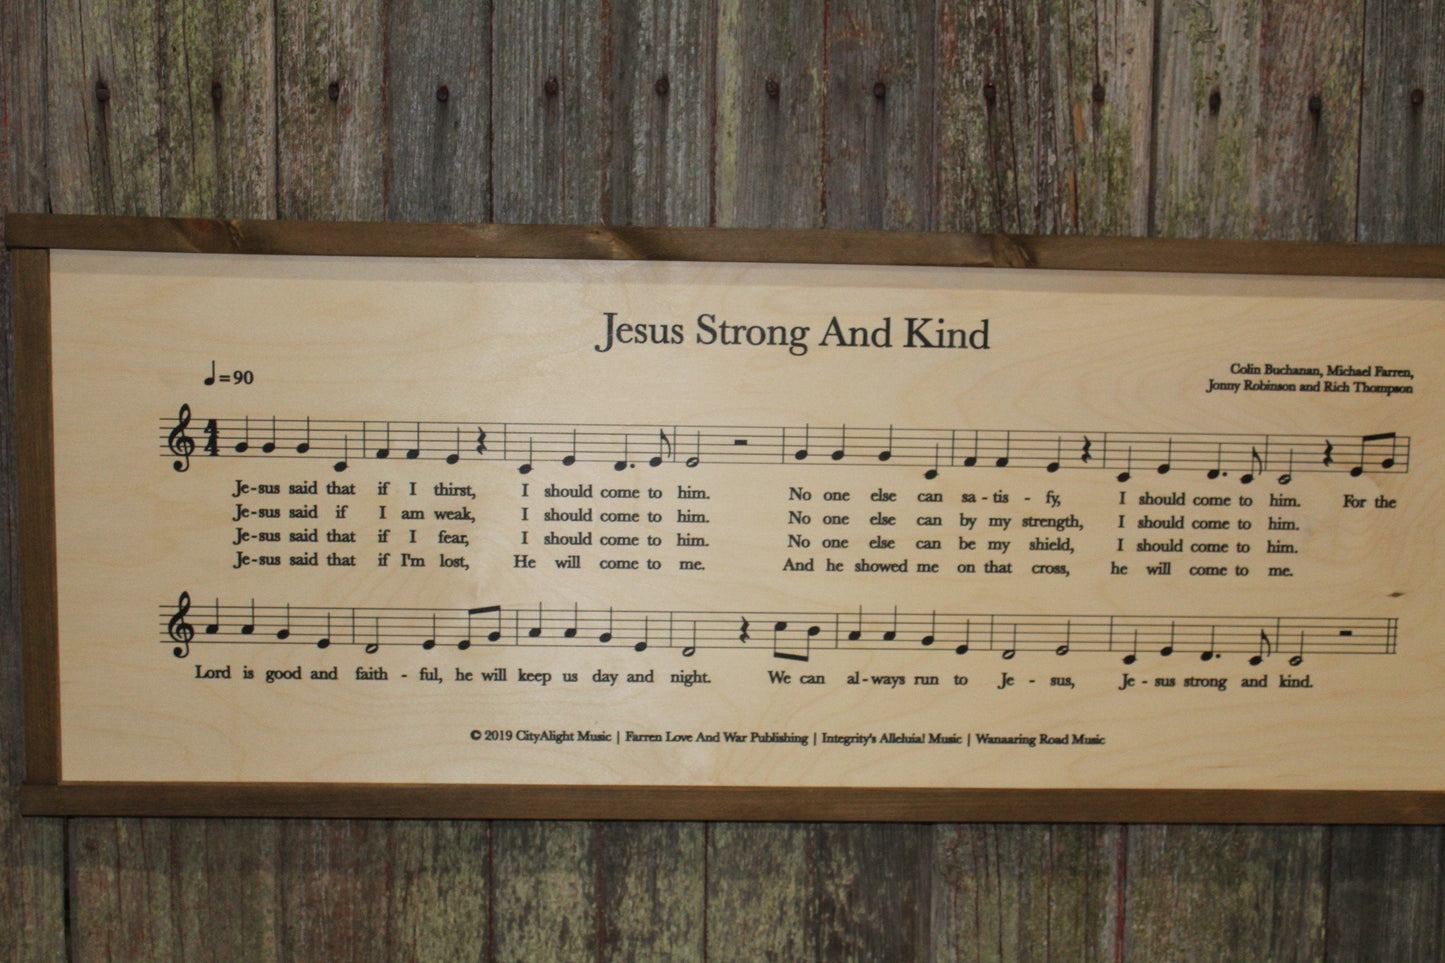 Custom Sheet Music Wood Sign Hymn Printed Music Song Musical Favorite Song Framed Shabby Chic Rustic Primitive Farmhouse